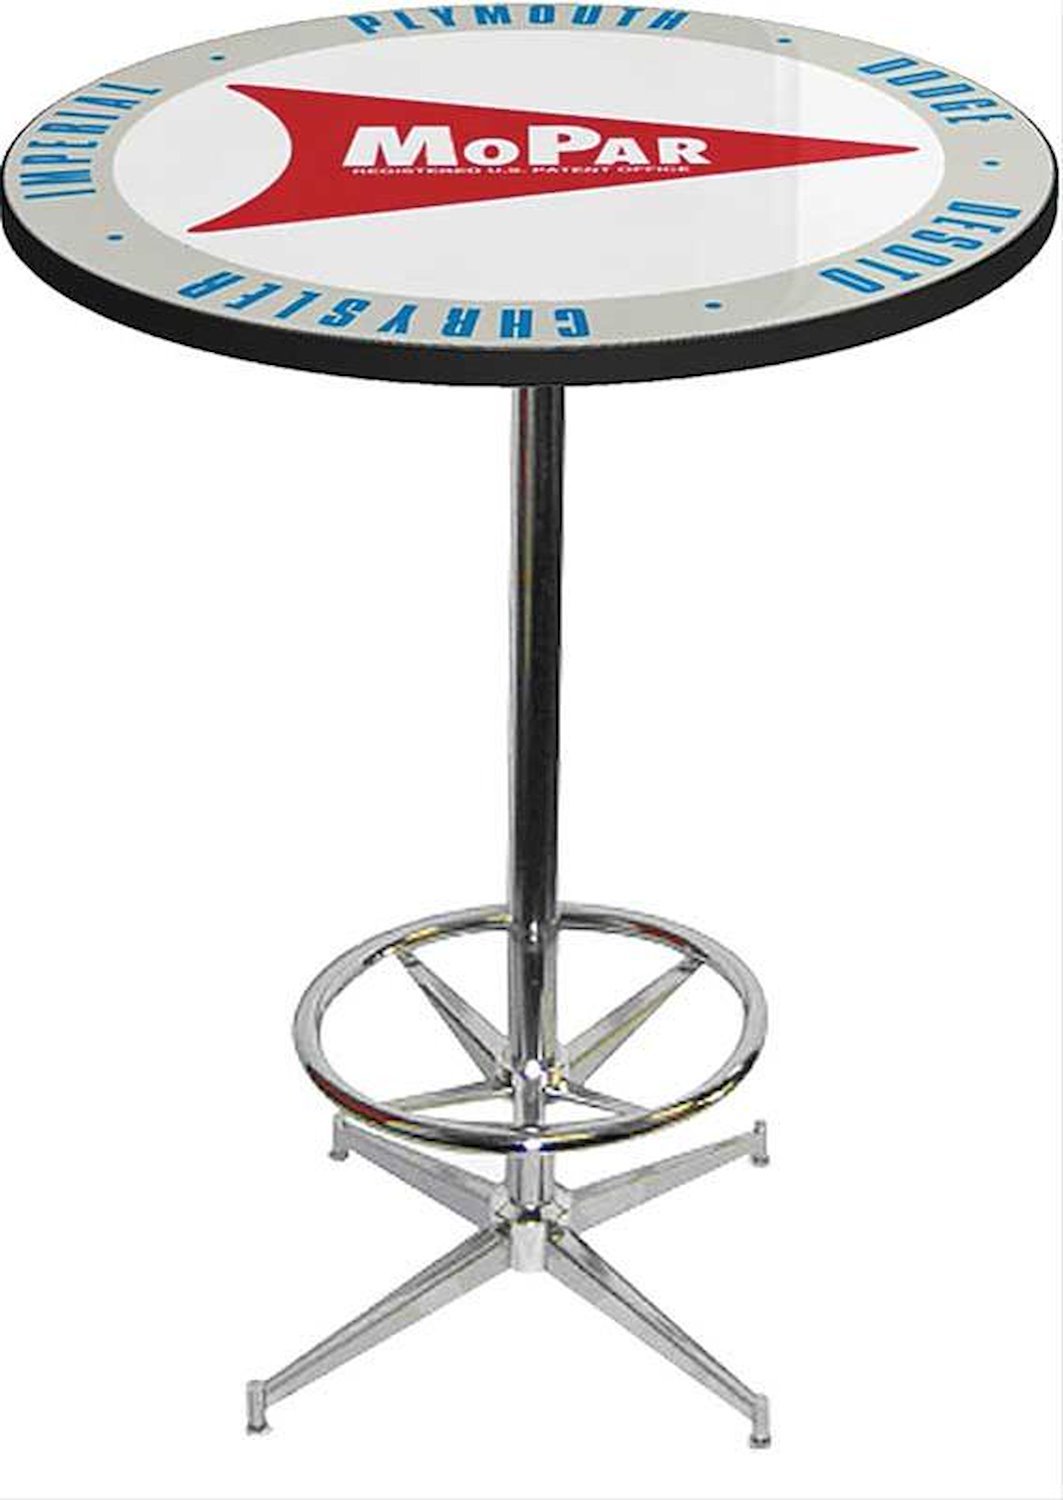 MD673102 Pub Table With Chrome Base And Foot Rest 1959-63 Style Mopar Logo Pub Table With Chrome Base And Foot Rest